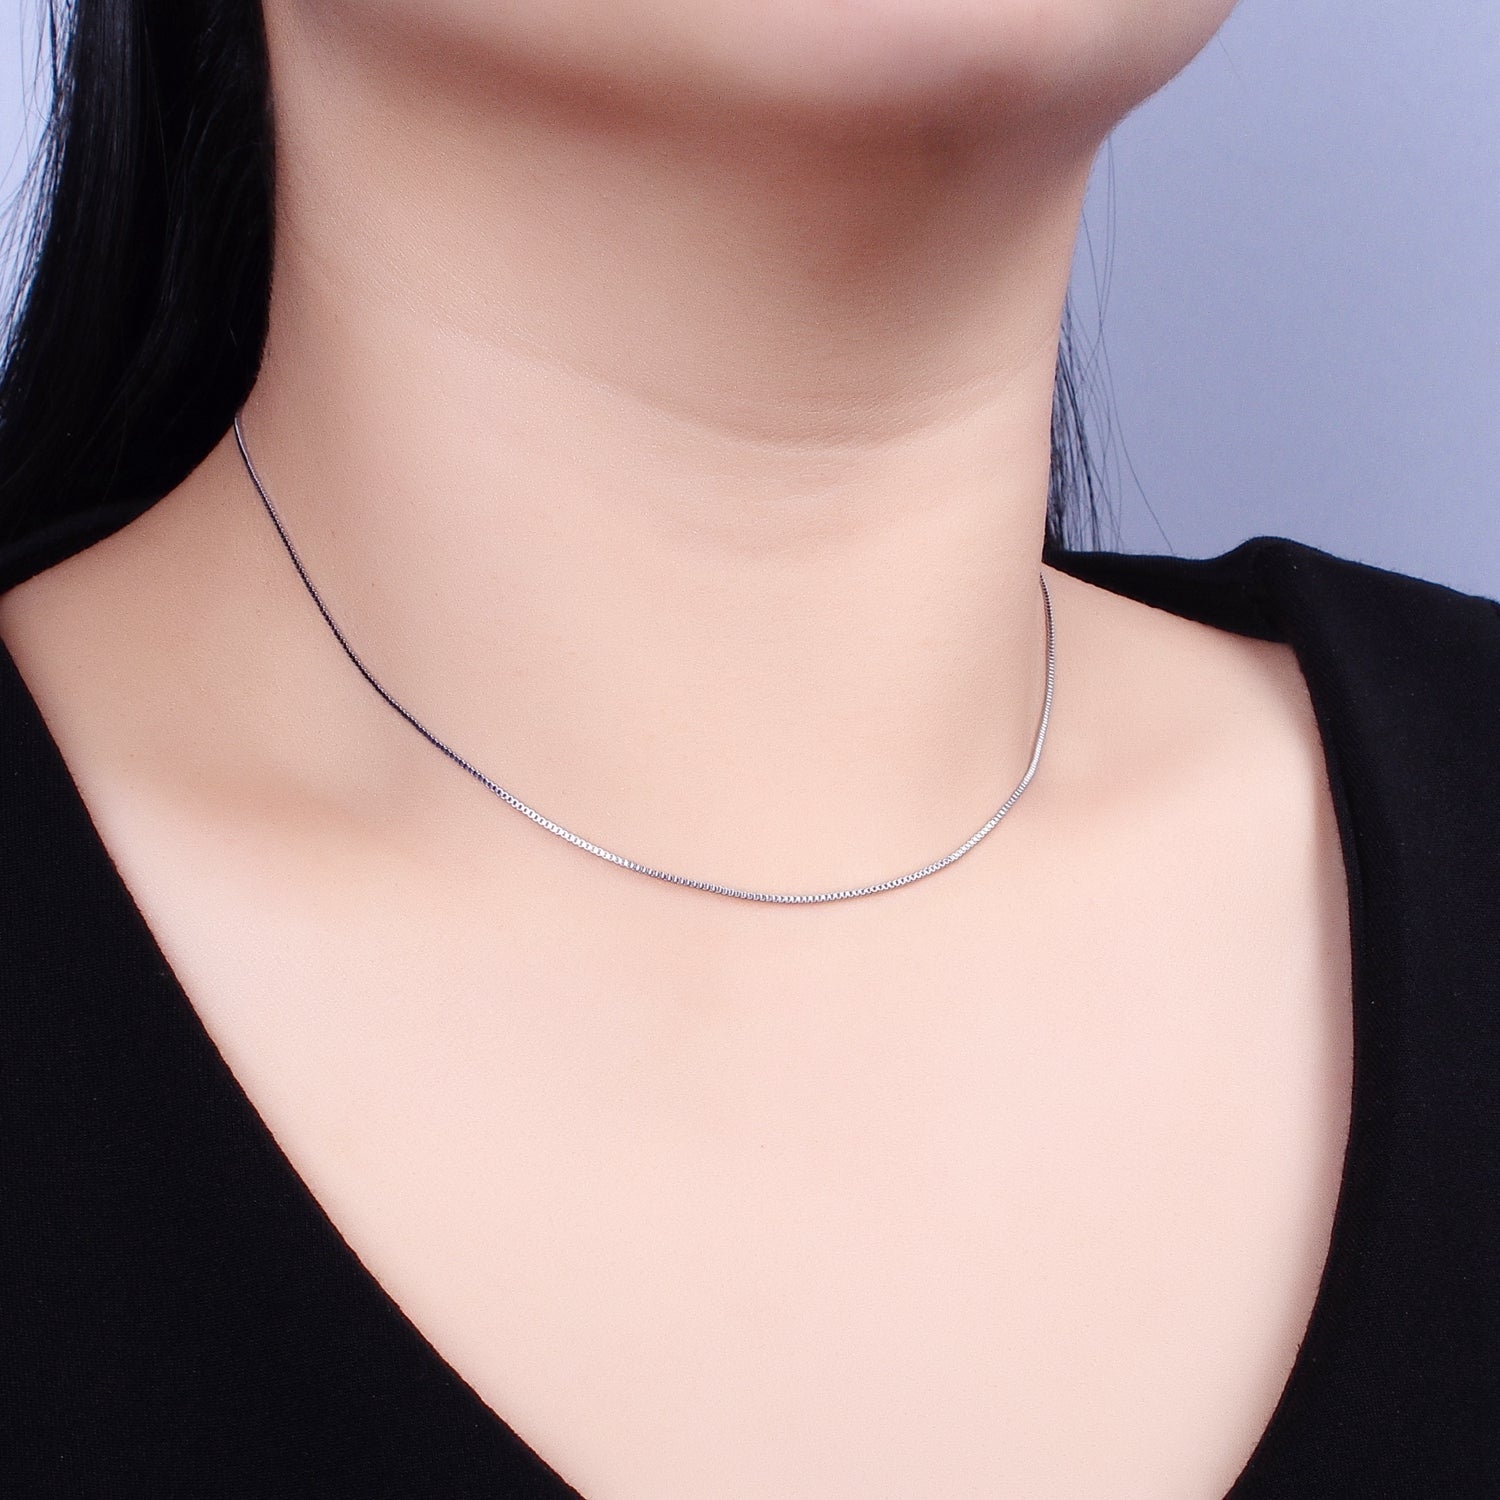 Dainty Cable Chain Necklace 19.6 inch Long Ready to Wear Necklace in Silver WA1679 - DLUXCA